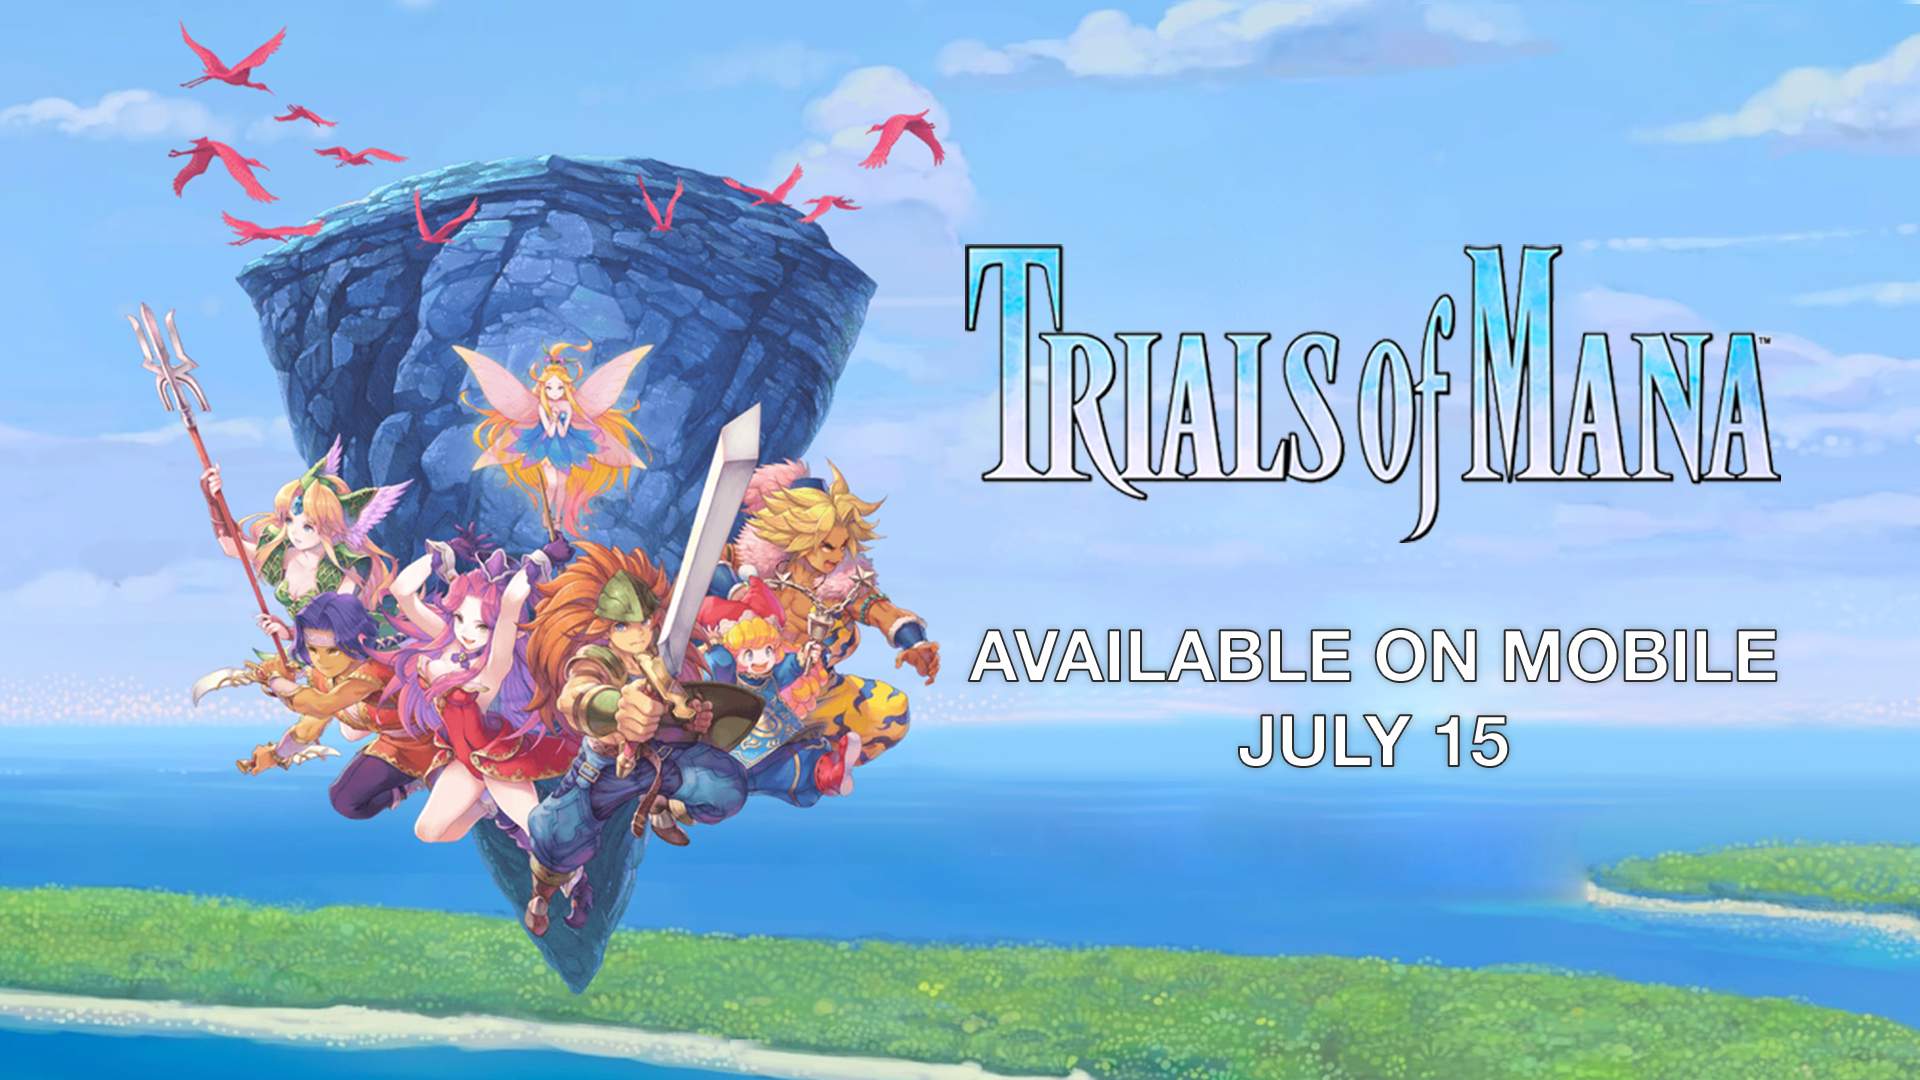 Trials of Mana | AVAILABLE ON MOBILE JULY 15, 2021